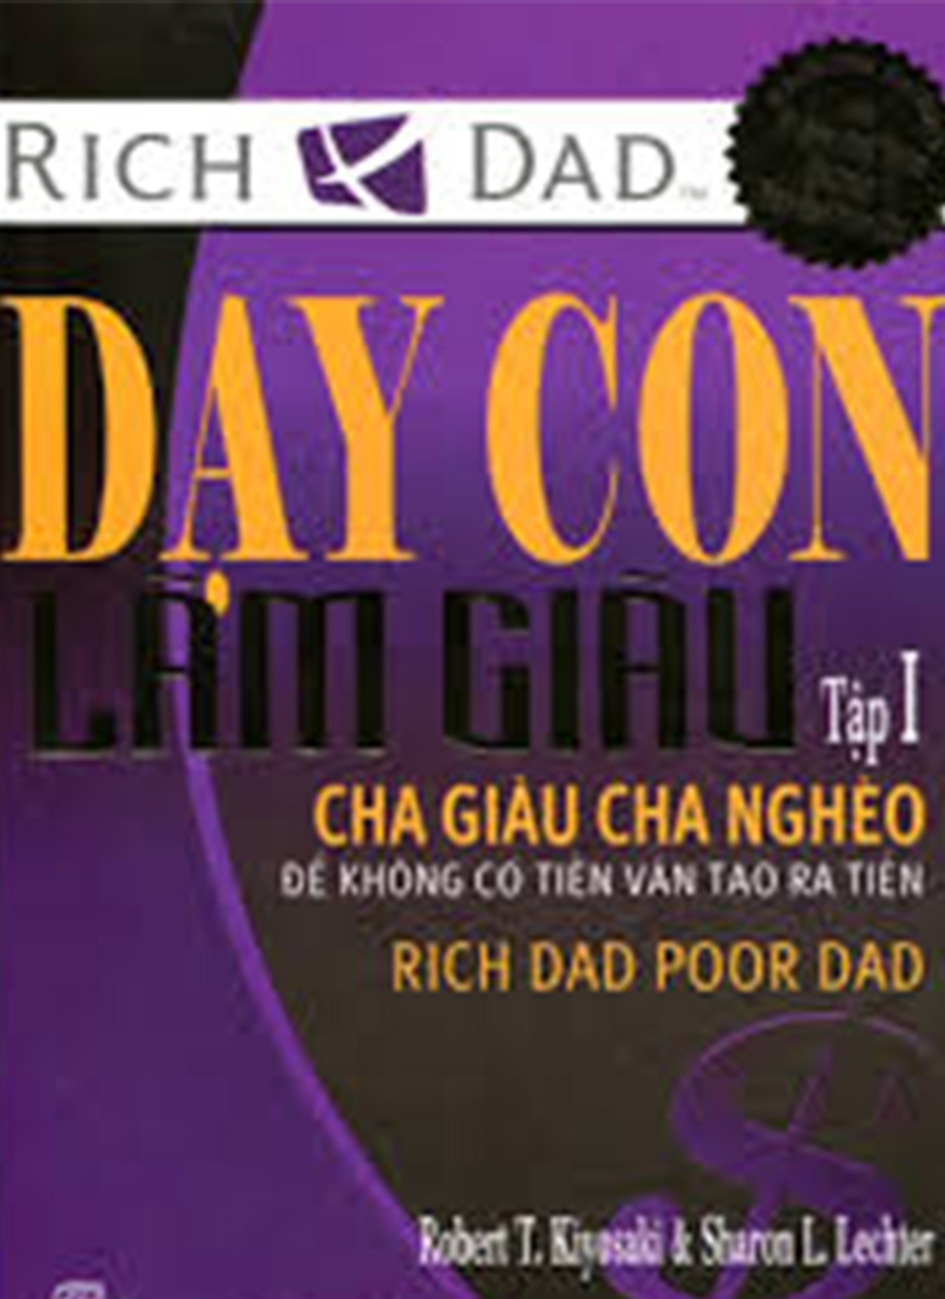 day con lam giau 1